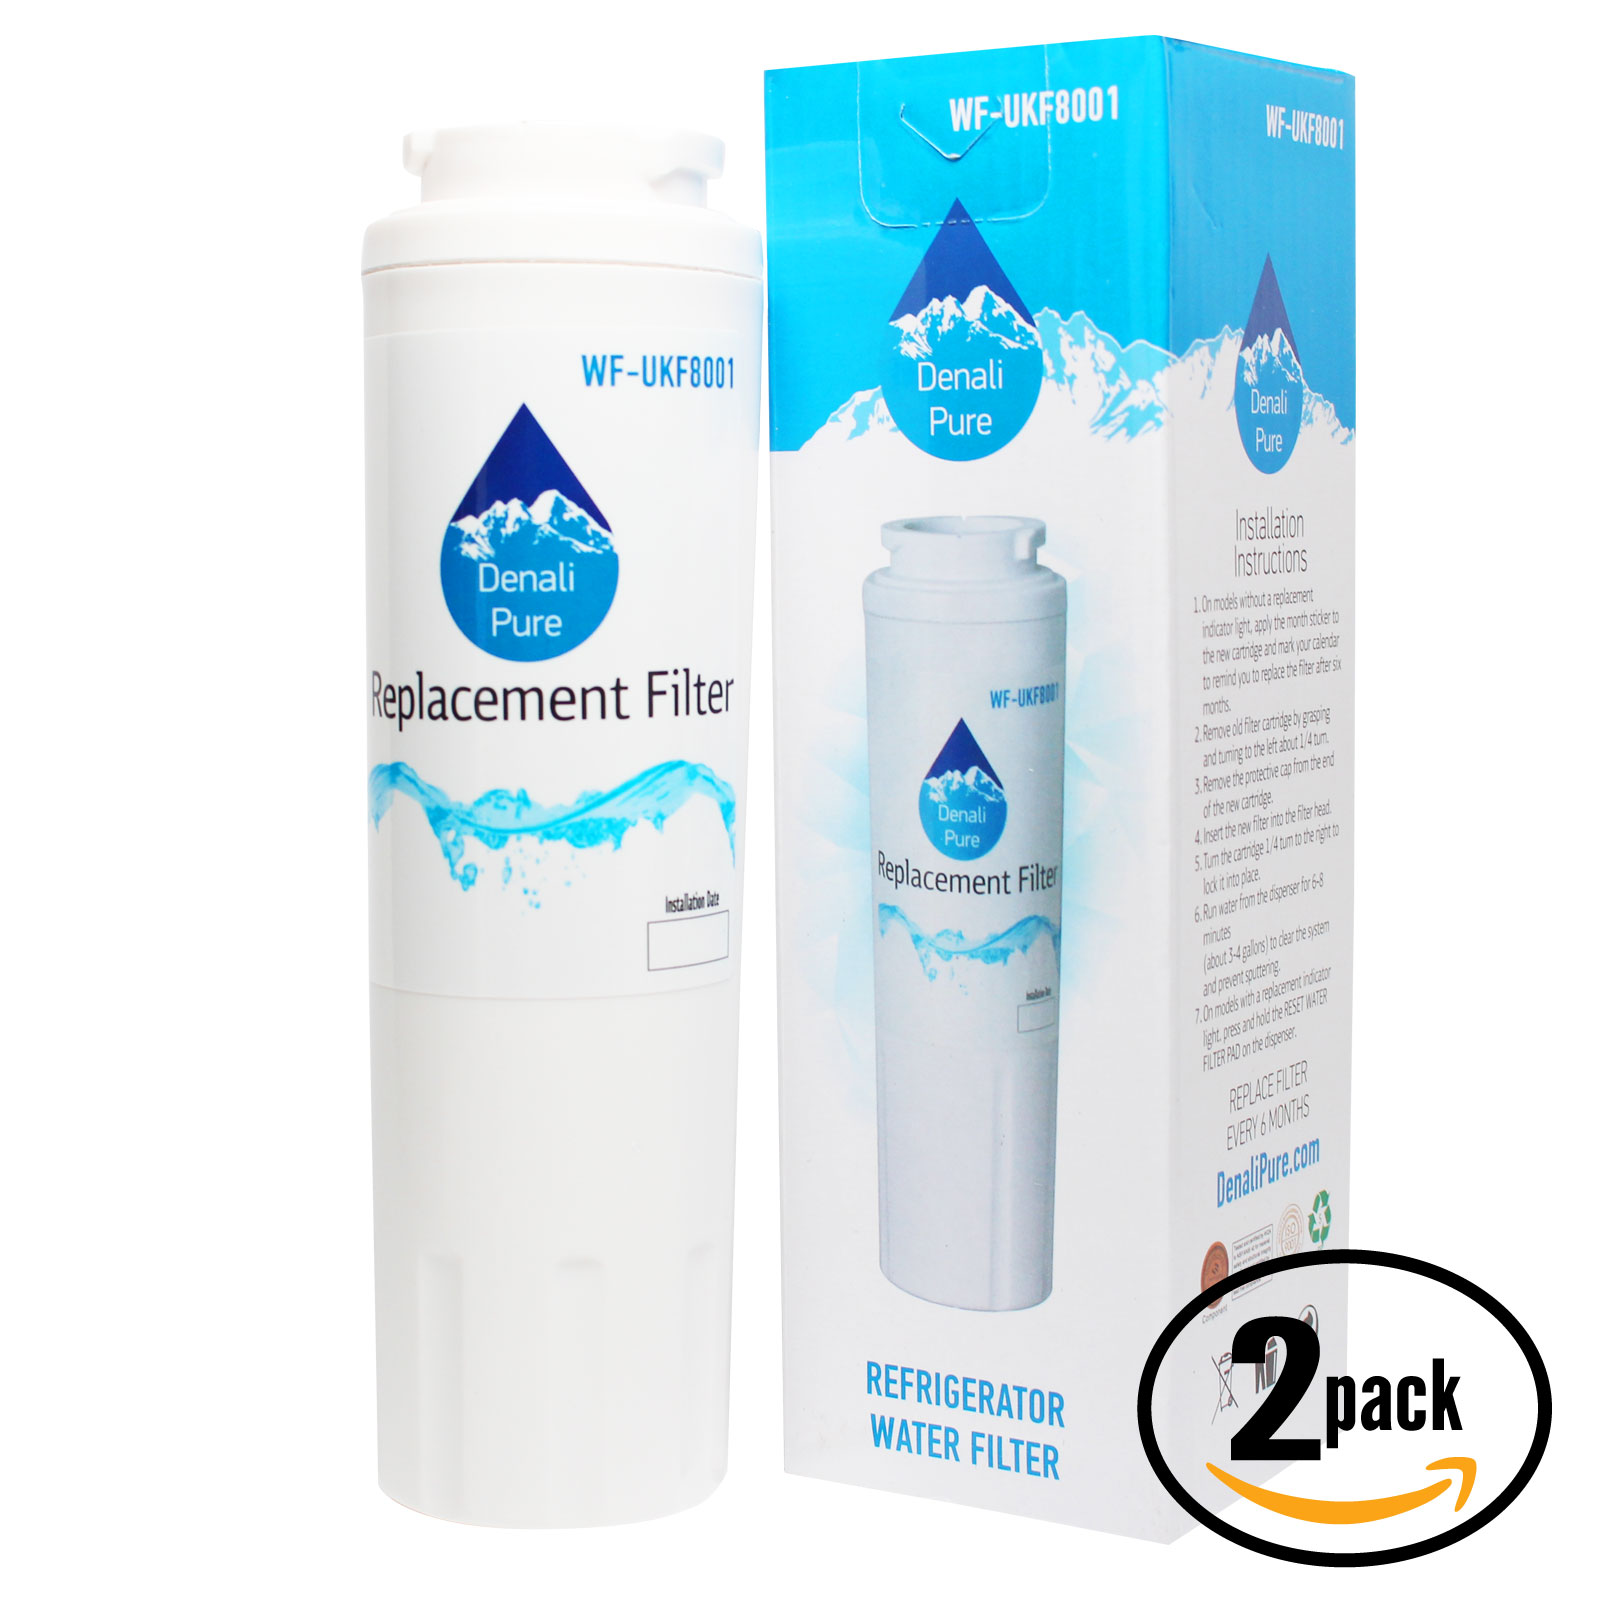 2-Pack Compatible with Maytag MFD2562VEM9 Refrigerator Water Filter - Compatible with Maytag UKF8001 Fridge Water Filter Cartridge - image 1 of 4